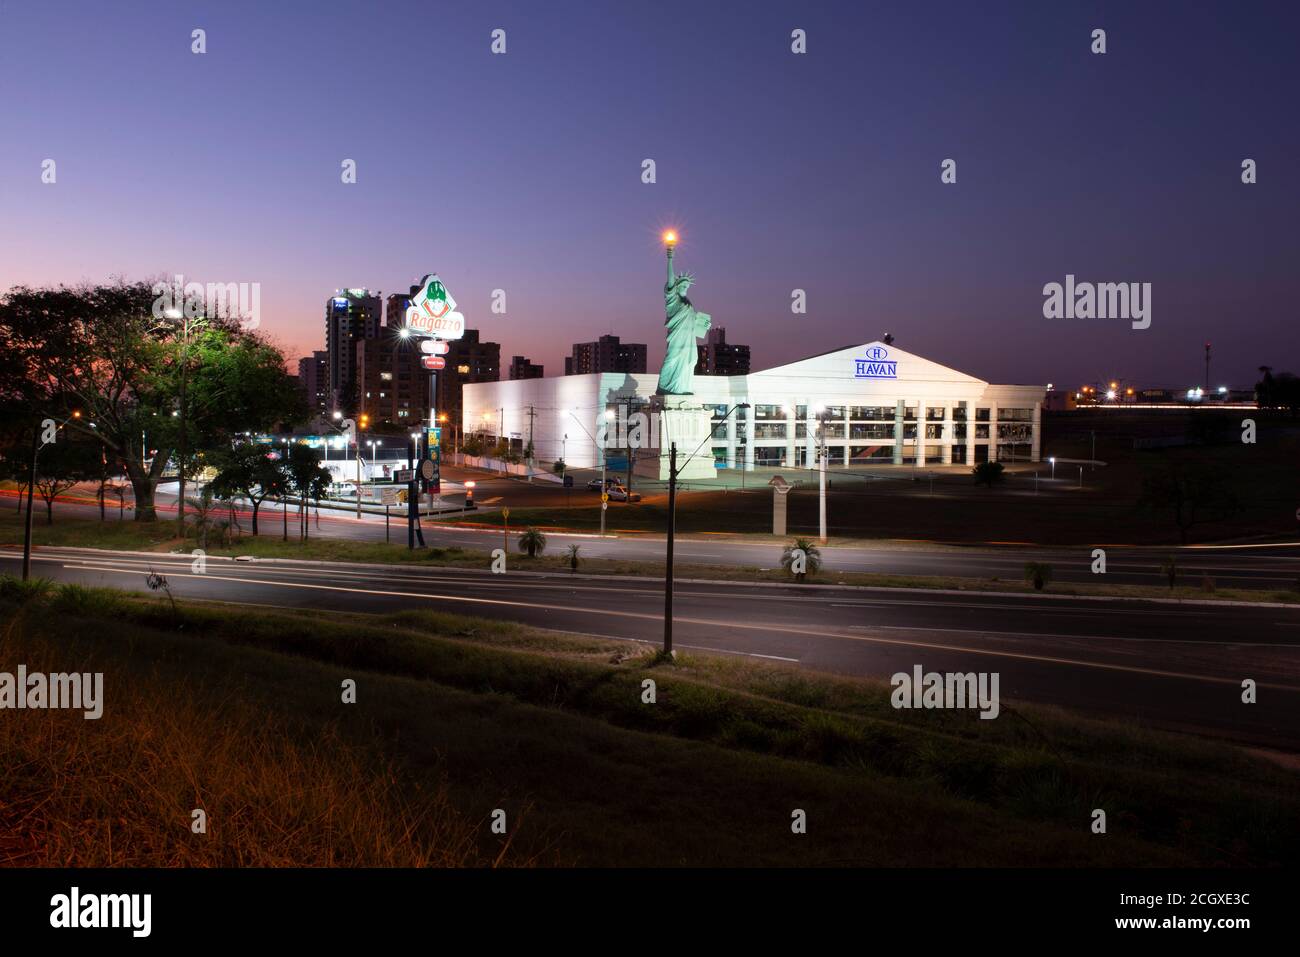 Bauru, Brazil. August 2, 2020: Long exposure of Statue Of Liberty replica and facade of the famous Havan Store at night. The store's facade mimics tha Stock Photo